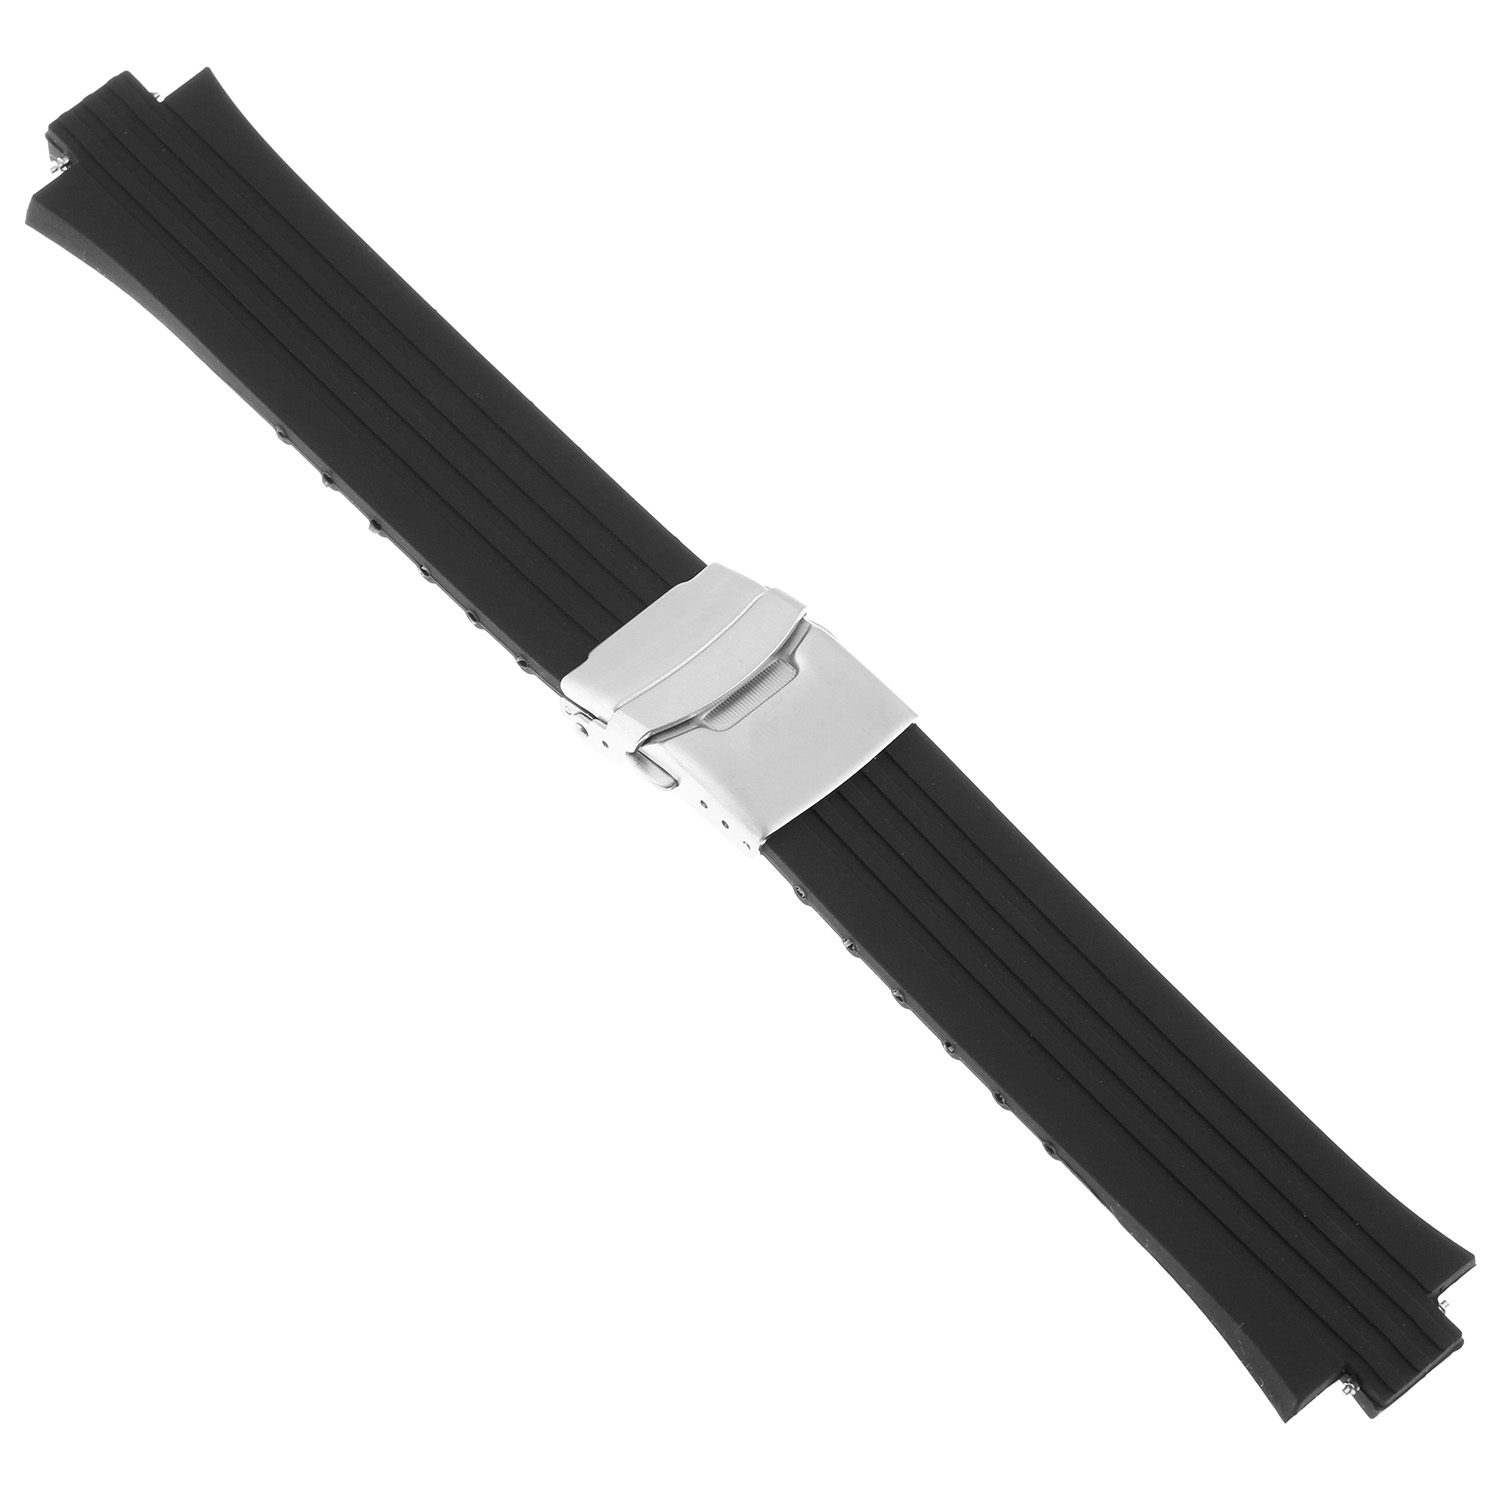 R.ors1.1 Main Black Strapsco Silicone Rubber Watch Band For ORIS TT1